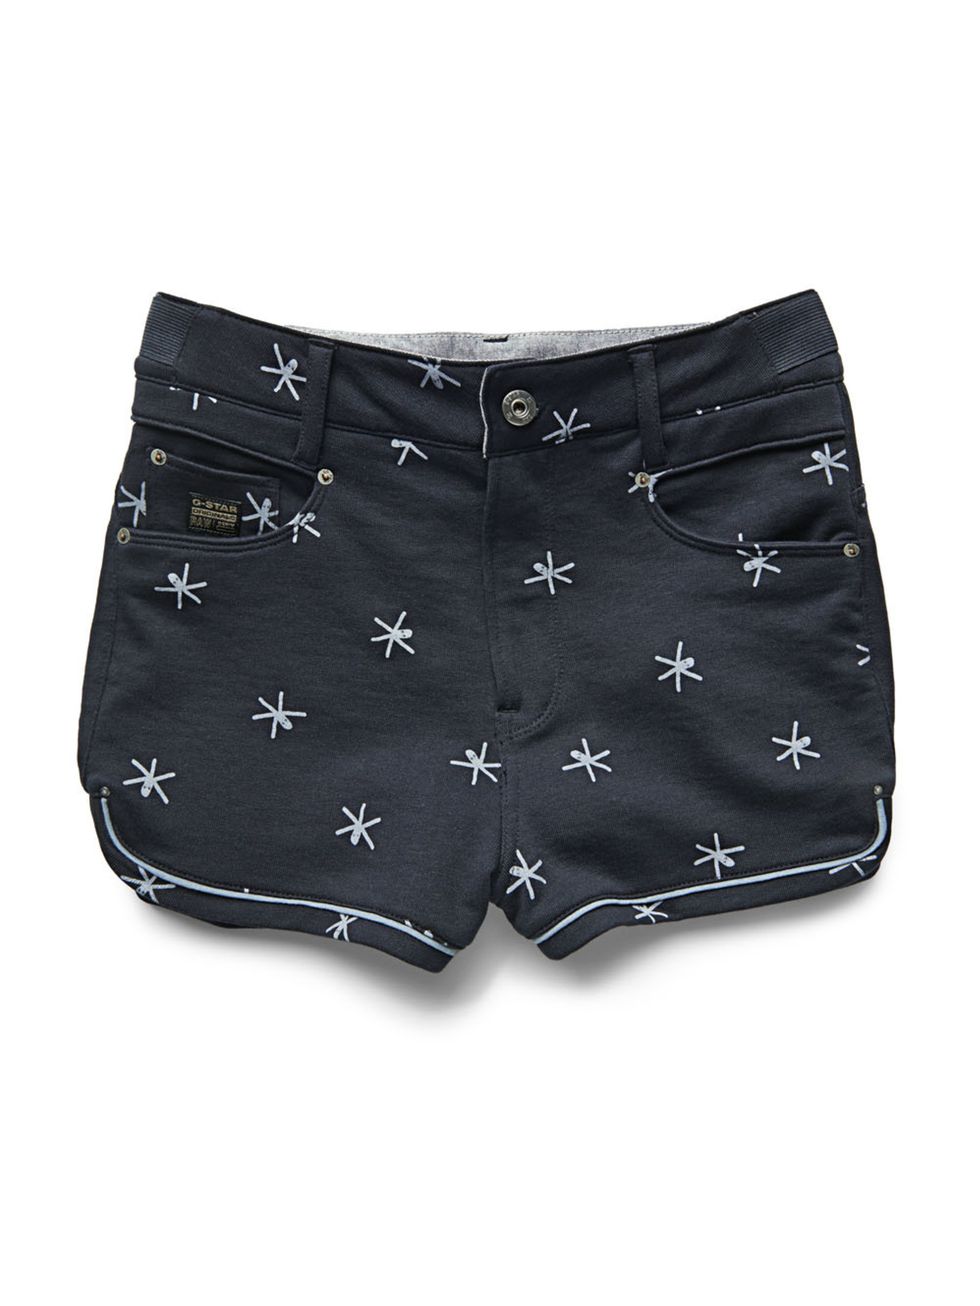 Blue, Product, Textile, White, Style, Pattern, Shorts, Black, Active shorts, Space, 